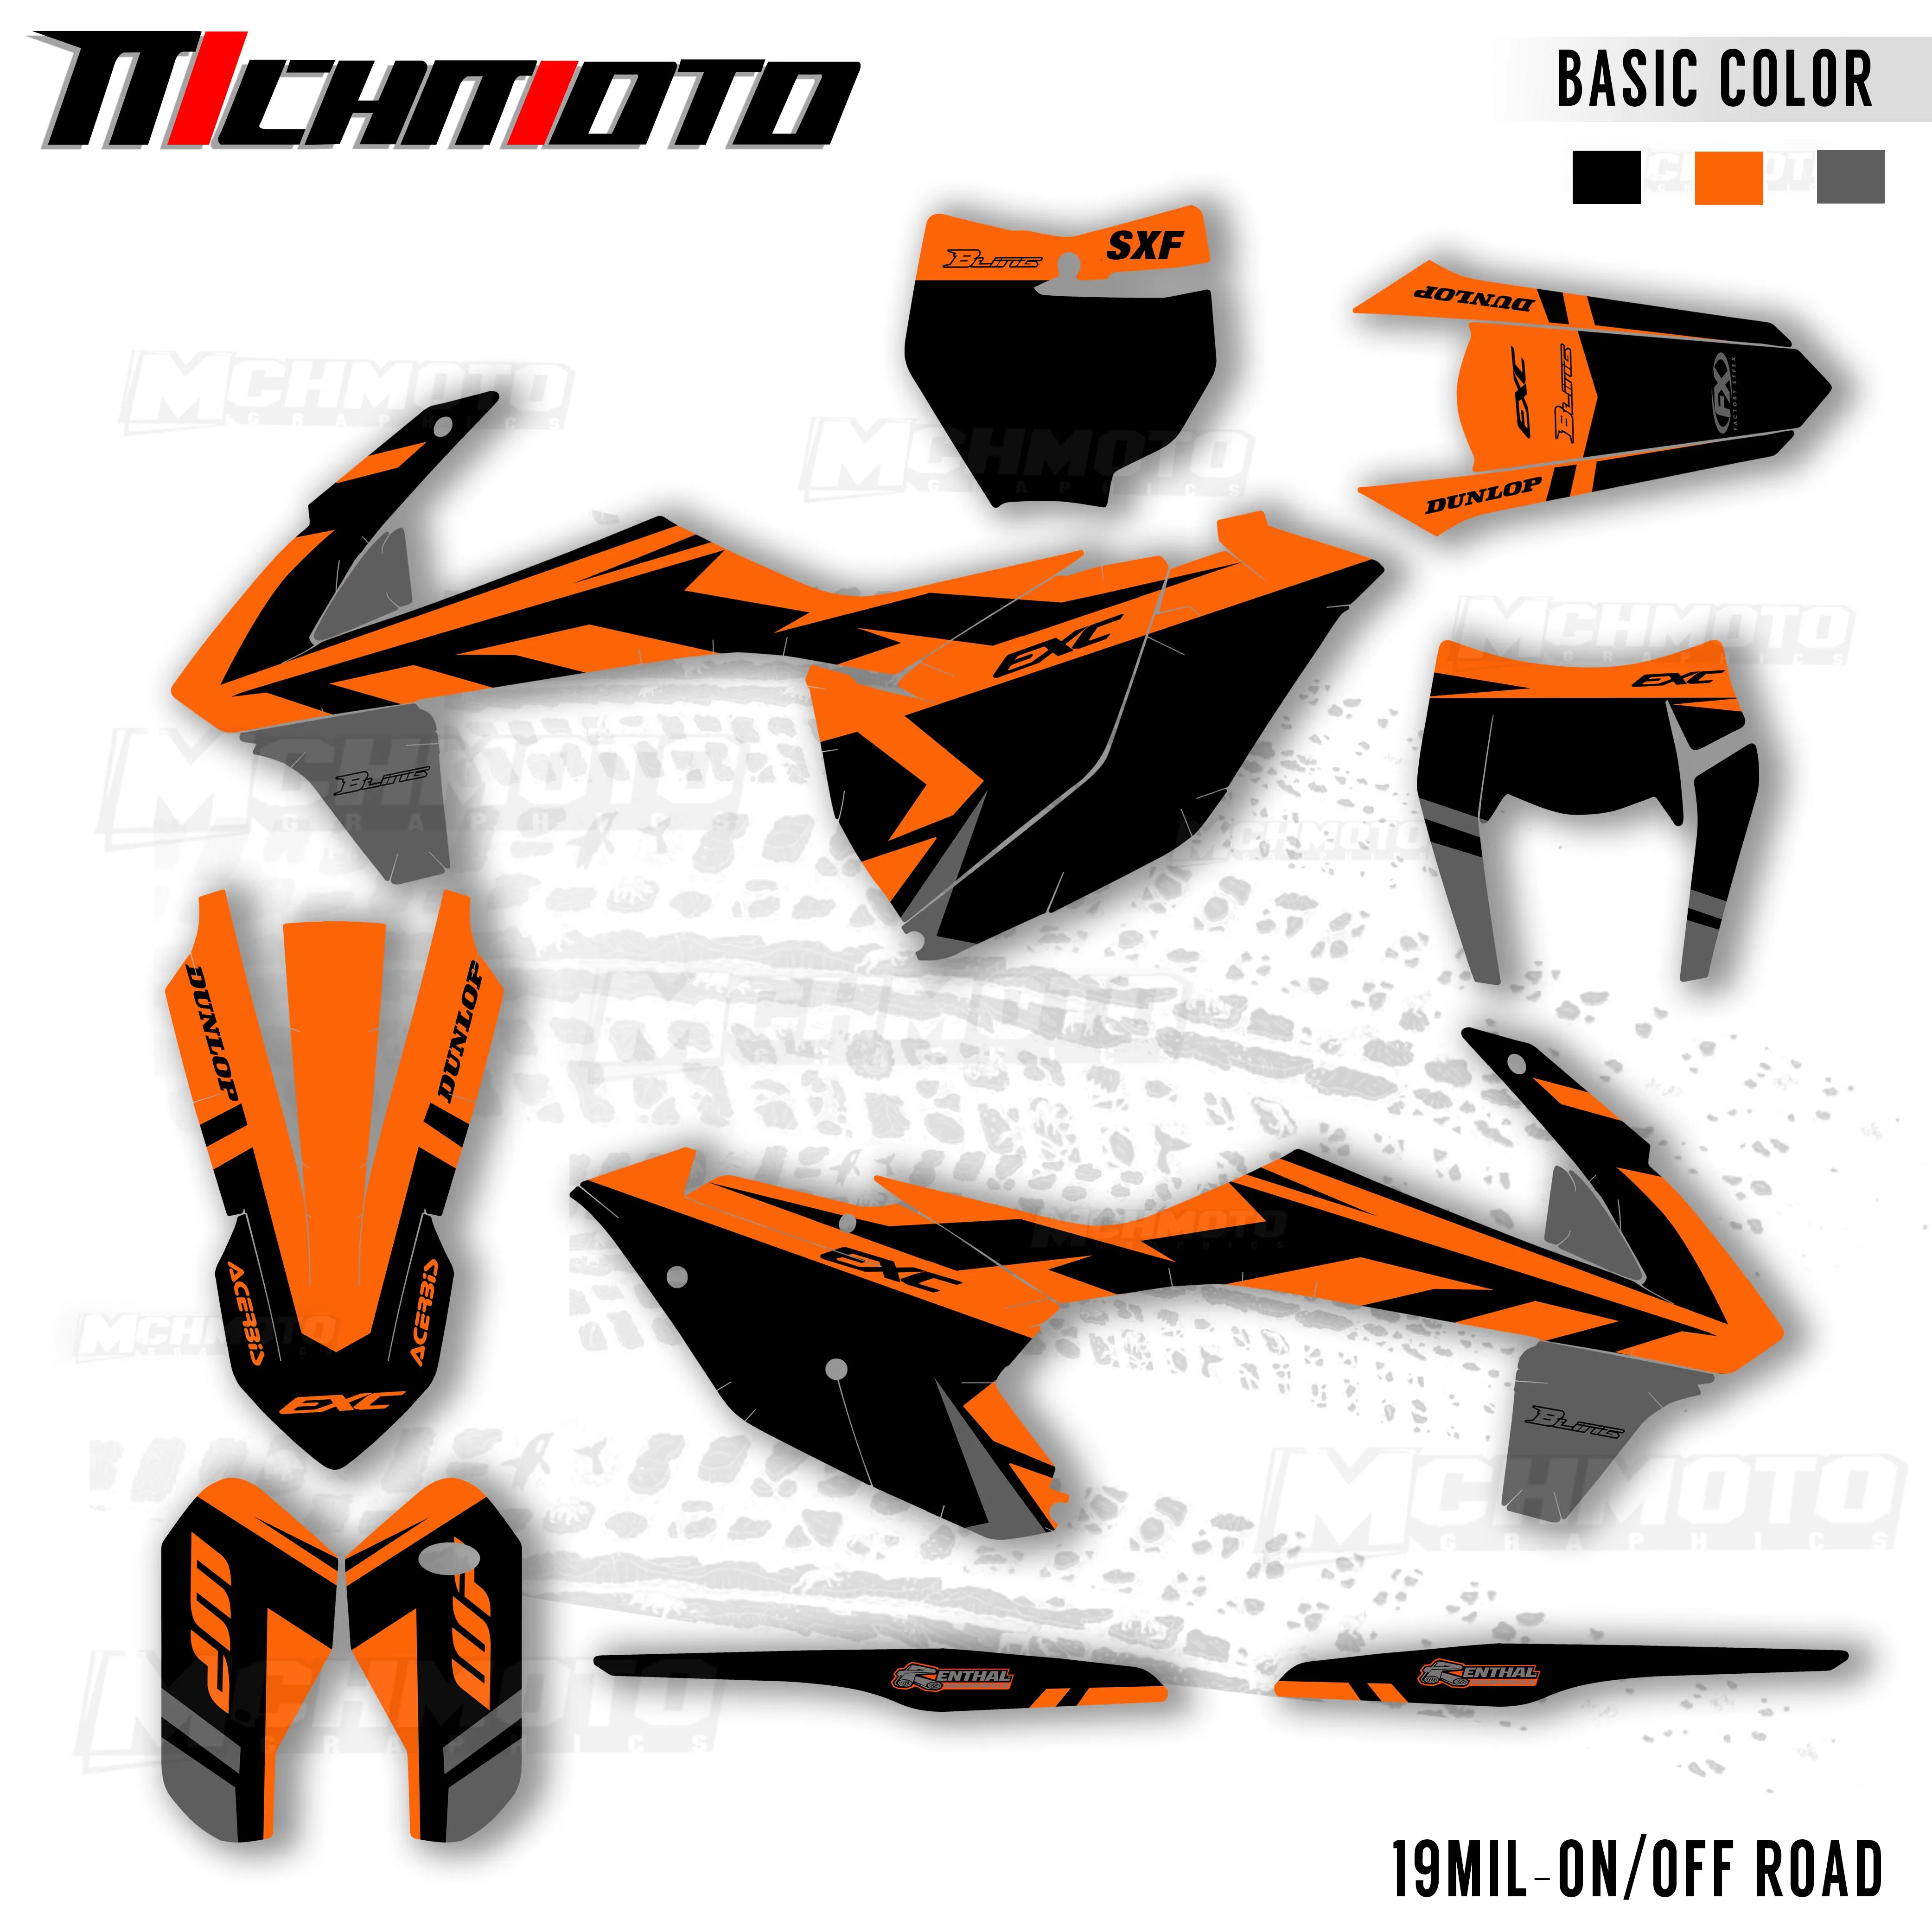 MCHMFG for KTM 125 250 300 350 450 SX SXF 2016 2017 2018 EXC EXCF XCW 2017 2018 2019 Graphics Backgrounds Stickers Kit Decal